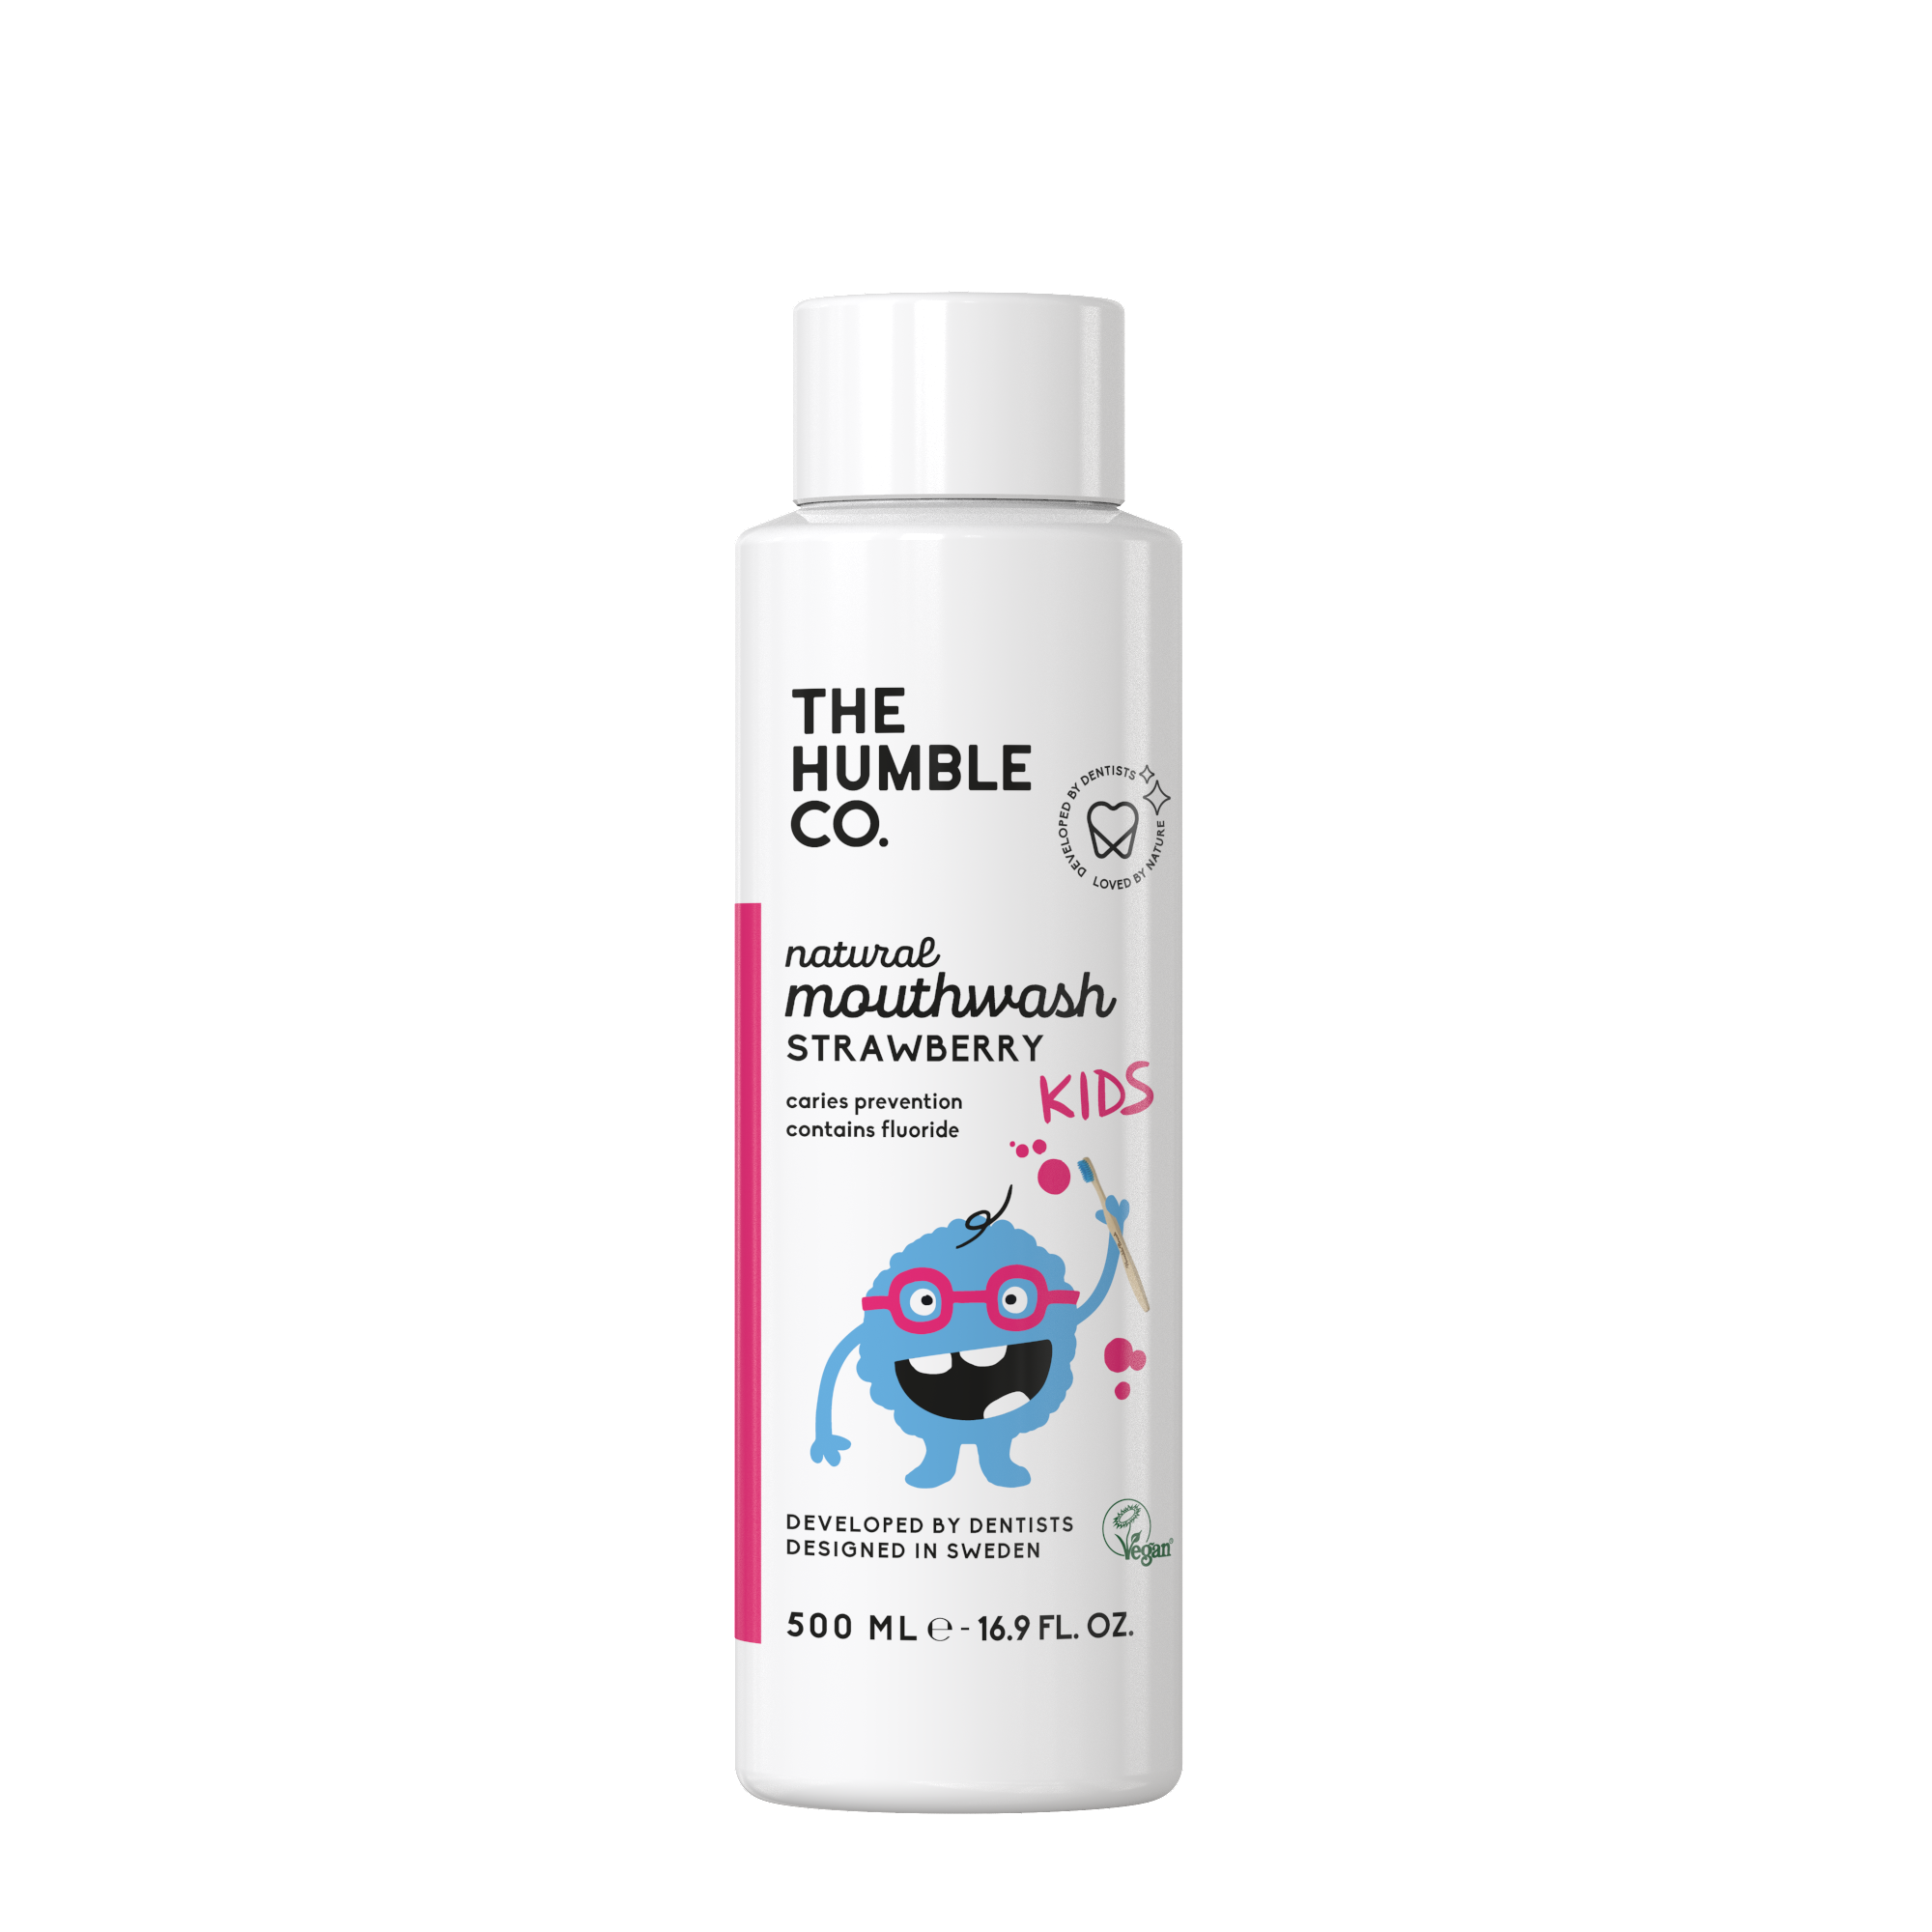 https://lyko.com/globalassets/product-images/the-humble-co.-humble-natural-mouthwash-kids-strawberry-1836-132-0003_1.png?ref=FE5E355204